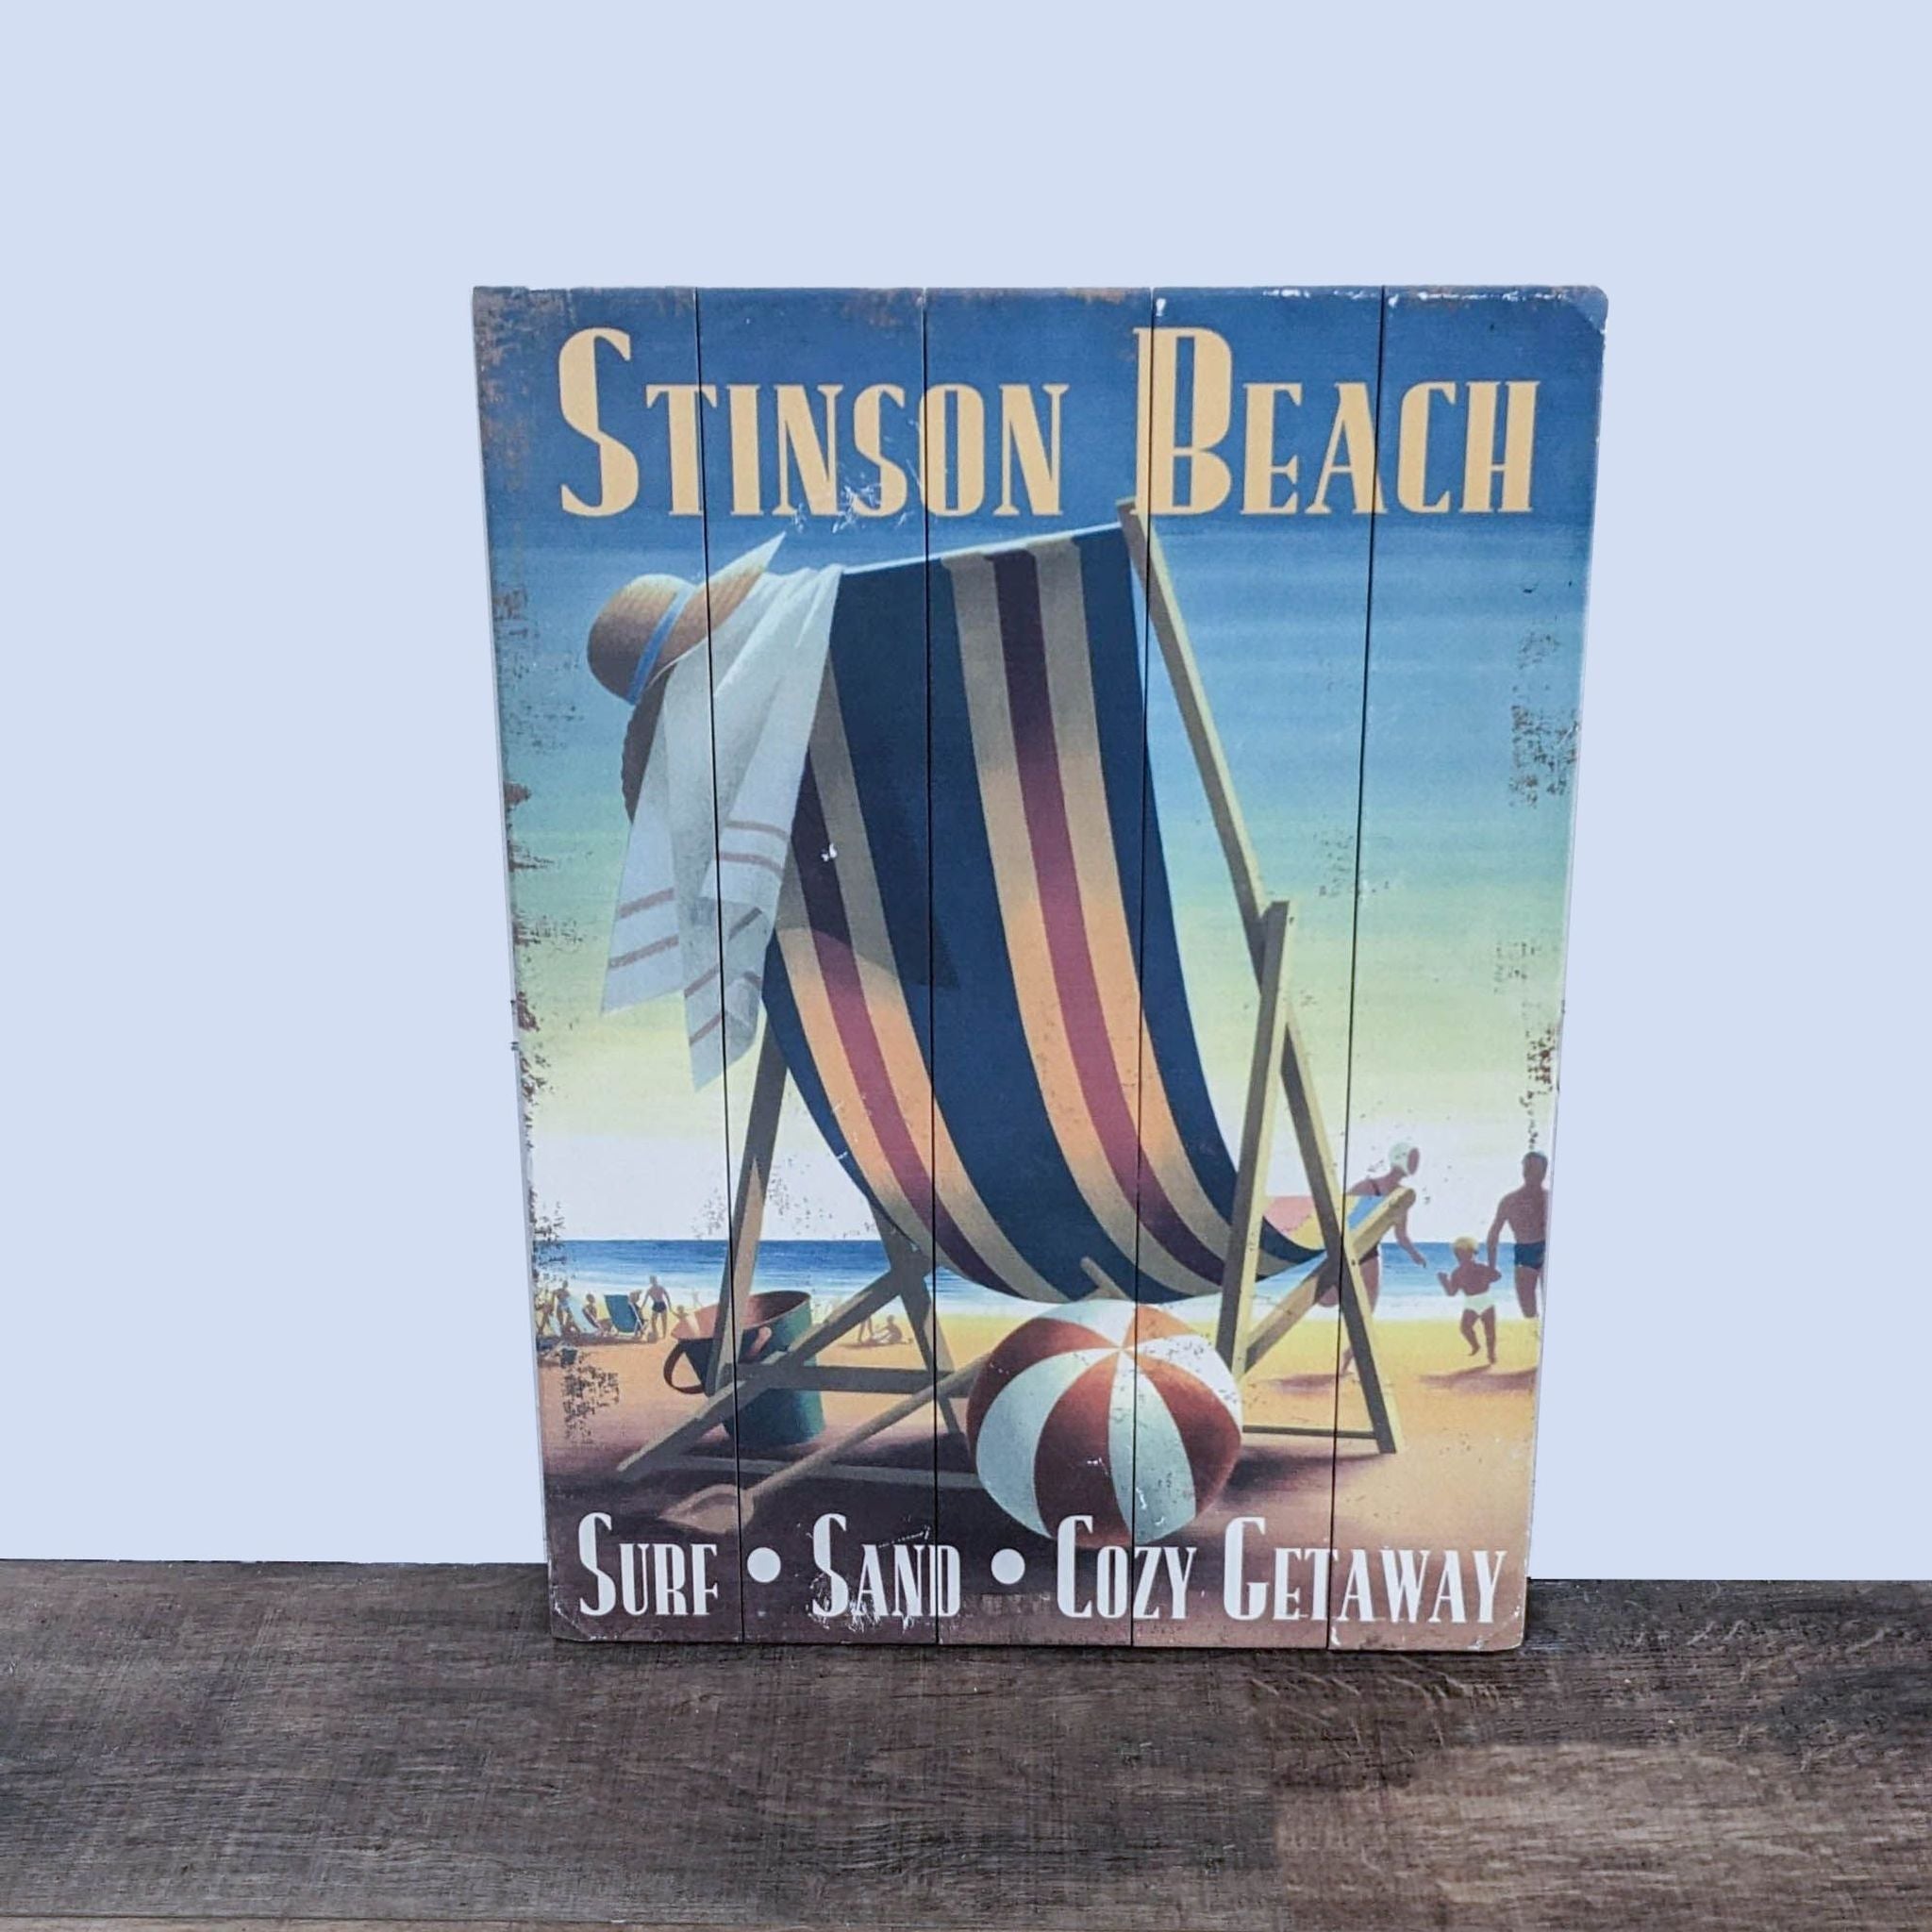 Alt text 1: A colorful art print on wood depicting a beach scene with a striped beach chair and umbrella, titled "Stinson Beach."